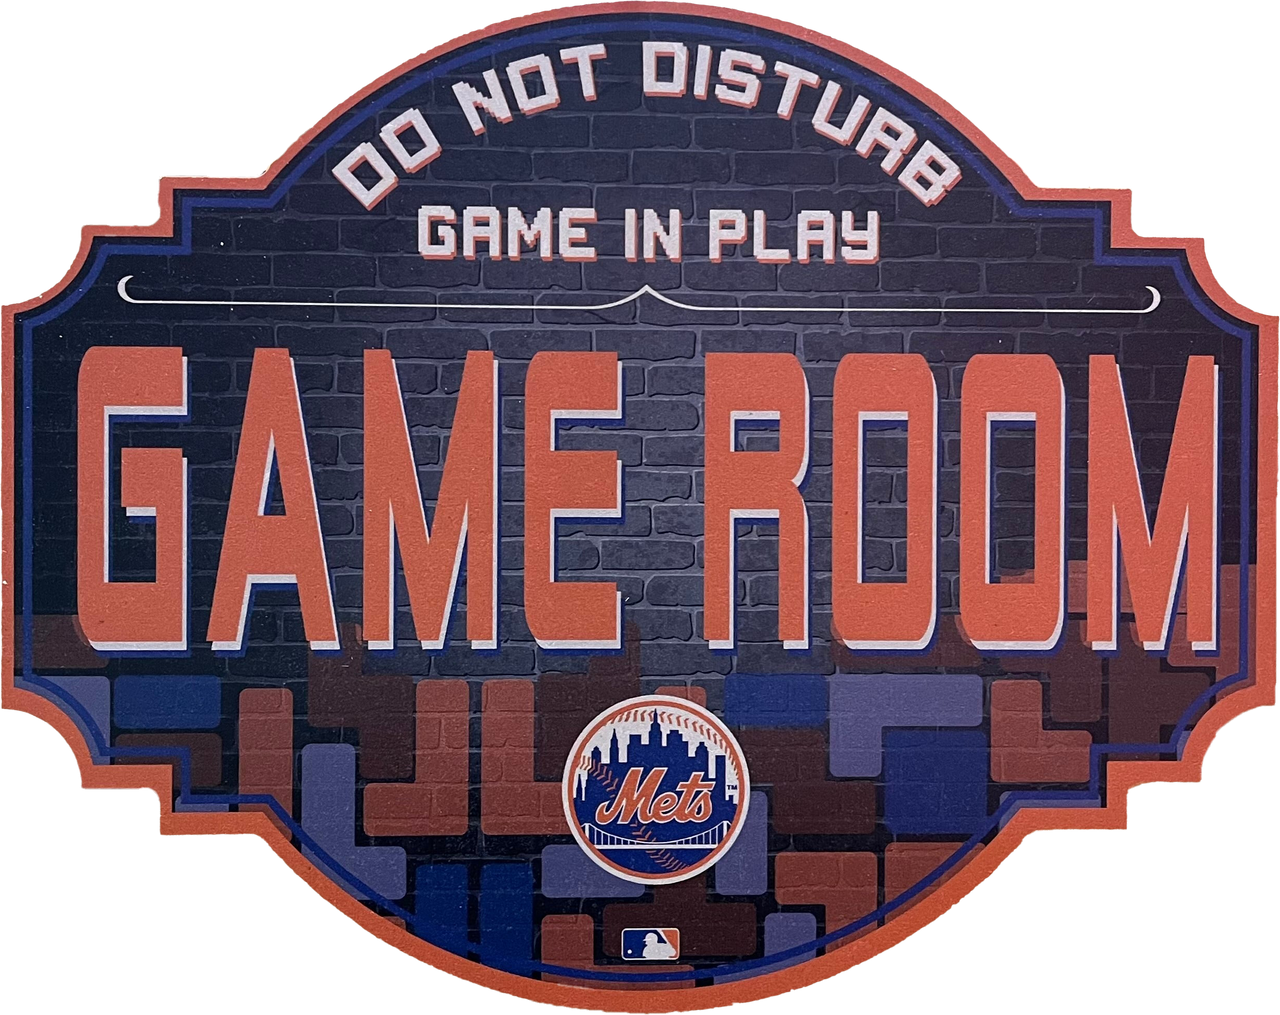 New York Mets 12" Game Room Wood Sign - Dynasty Sports & Framing 